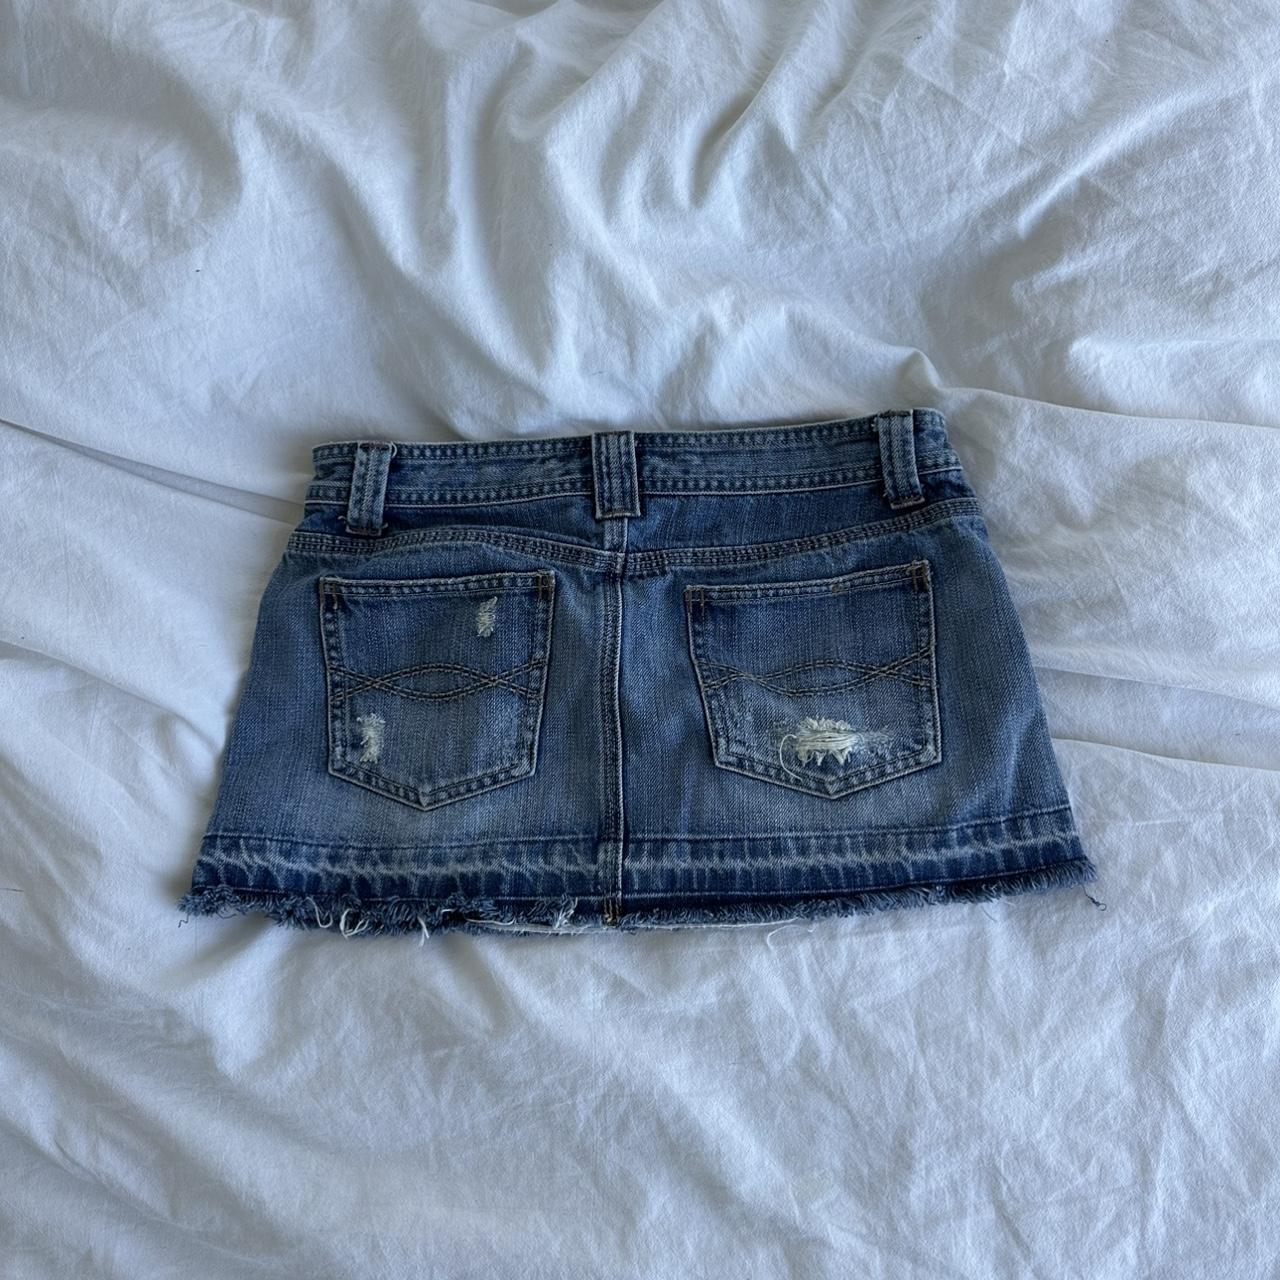 Abercrombie and fitch denim skirt - Depop